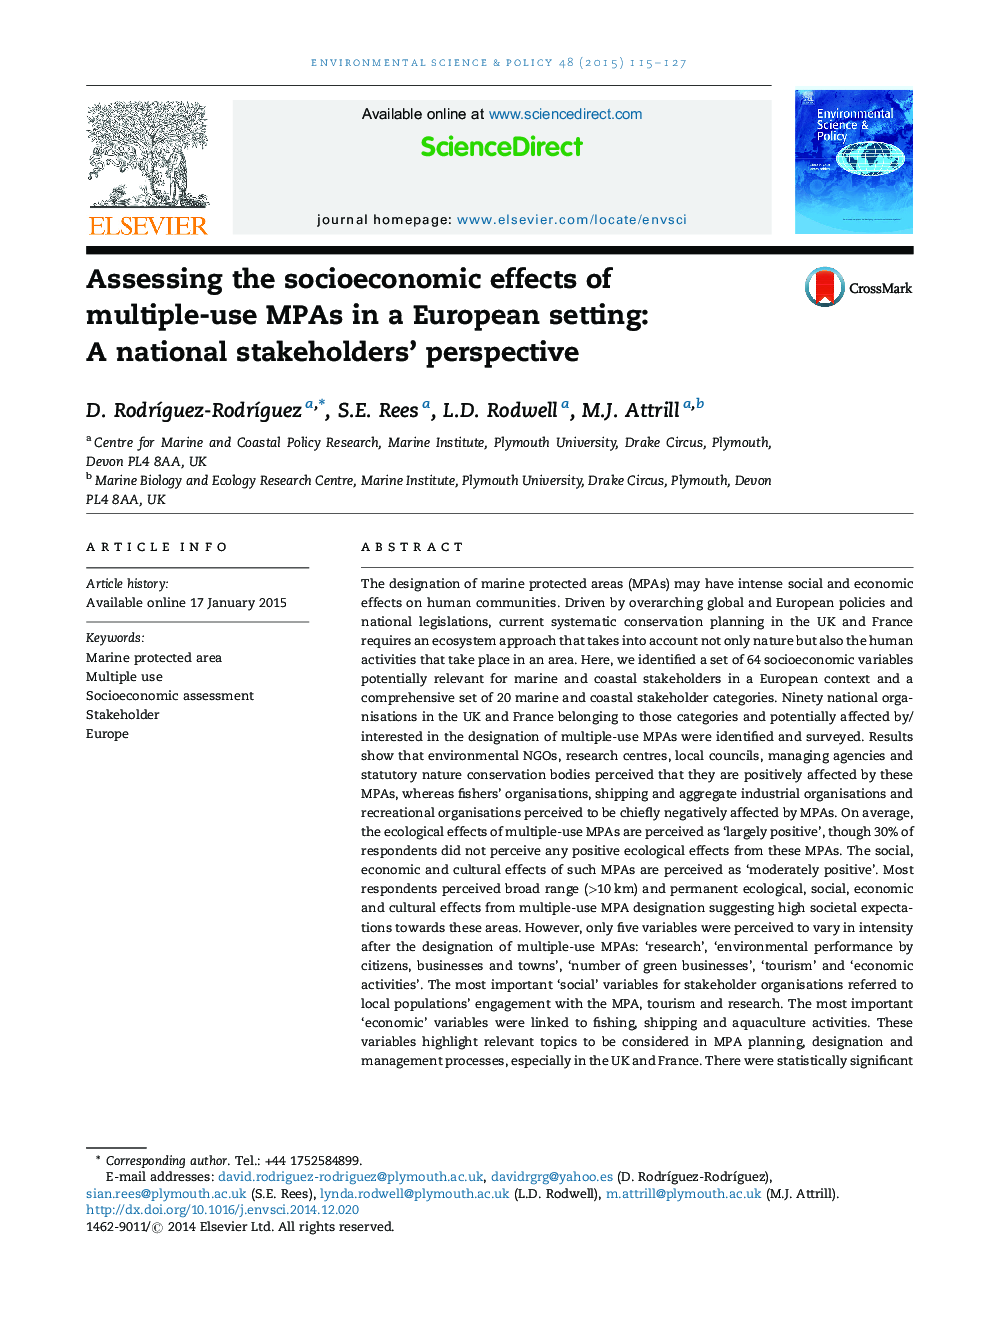 Assessing the socioeconomic effects of multiple-use MPAs in a European setting: A national stakeholders' perspective